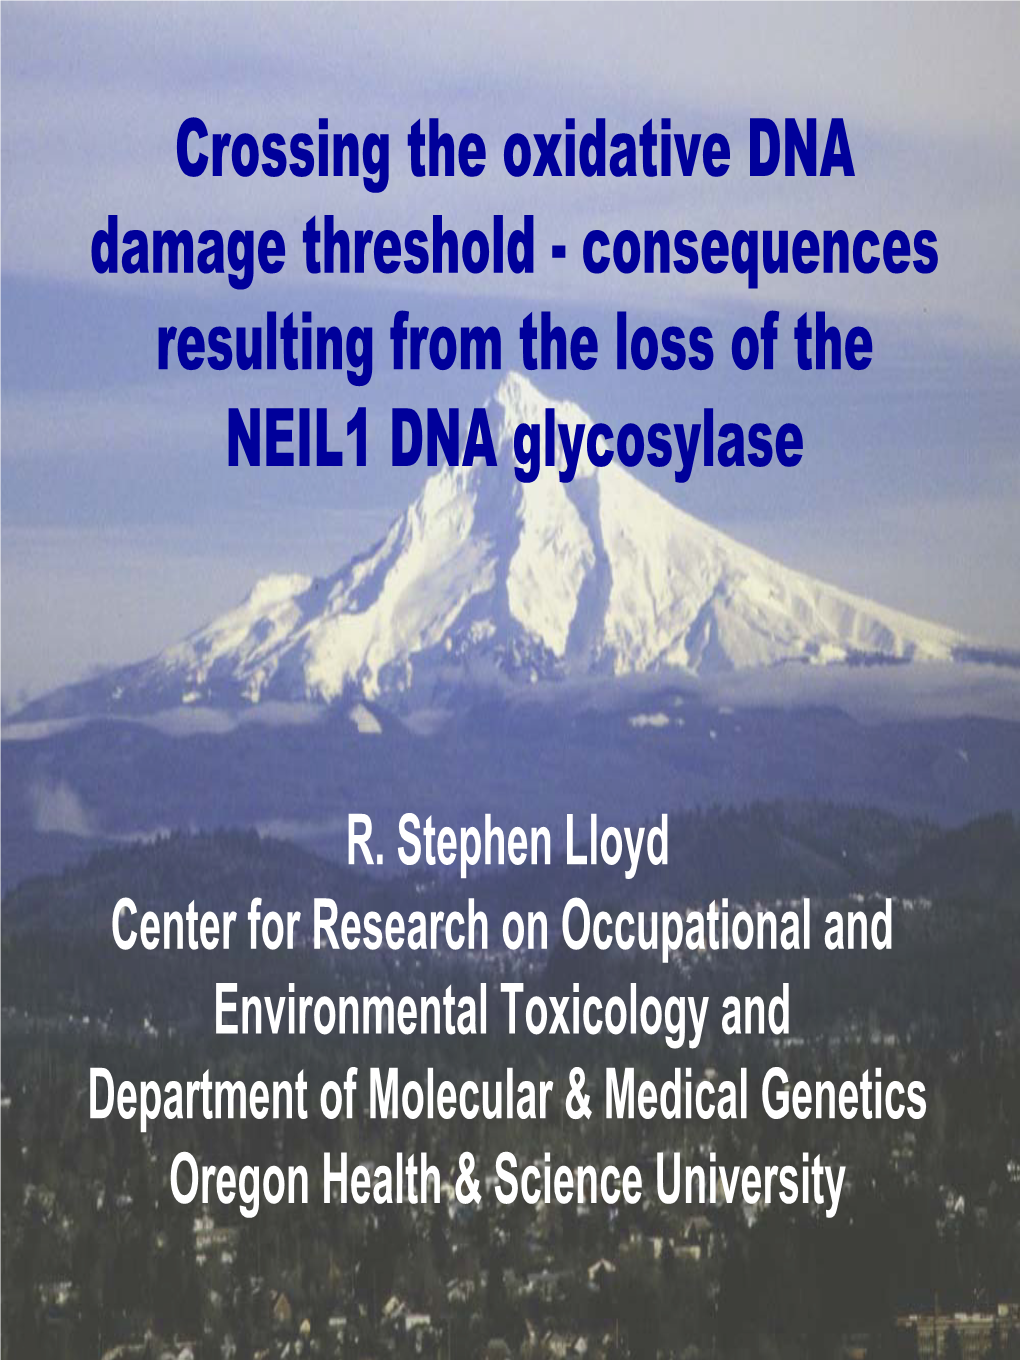 Consequences Resulting from the Loss of the NEIL1 DNA Glycosylase